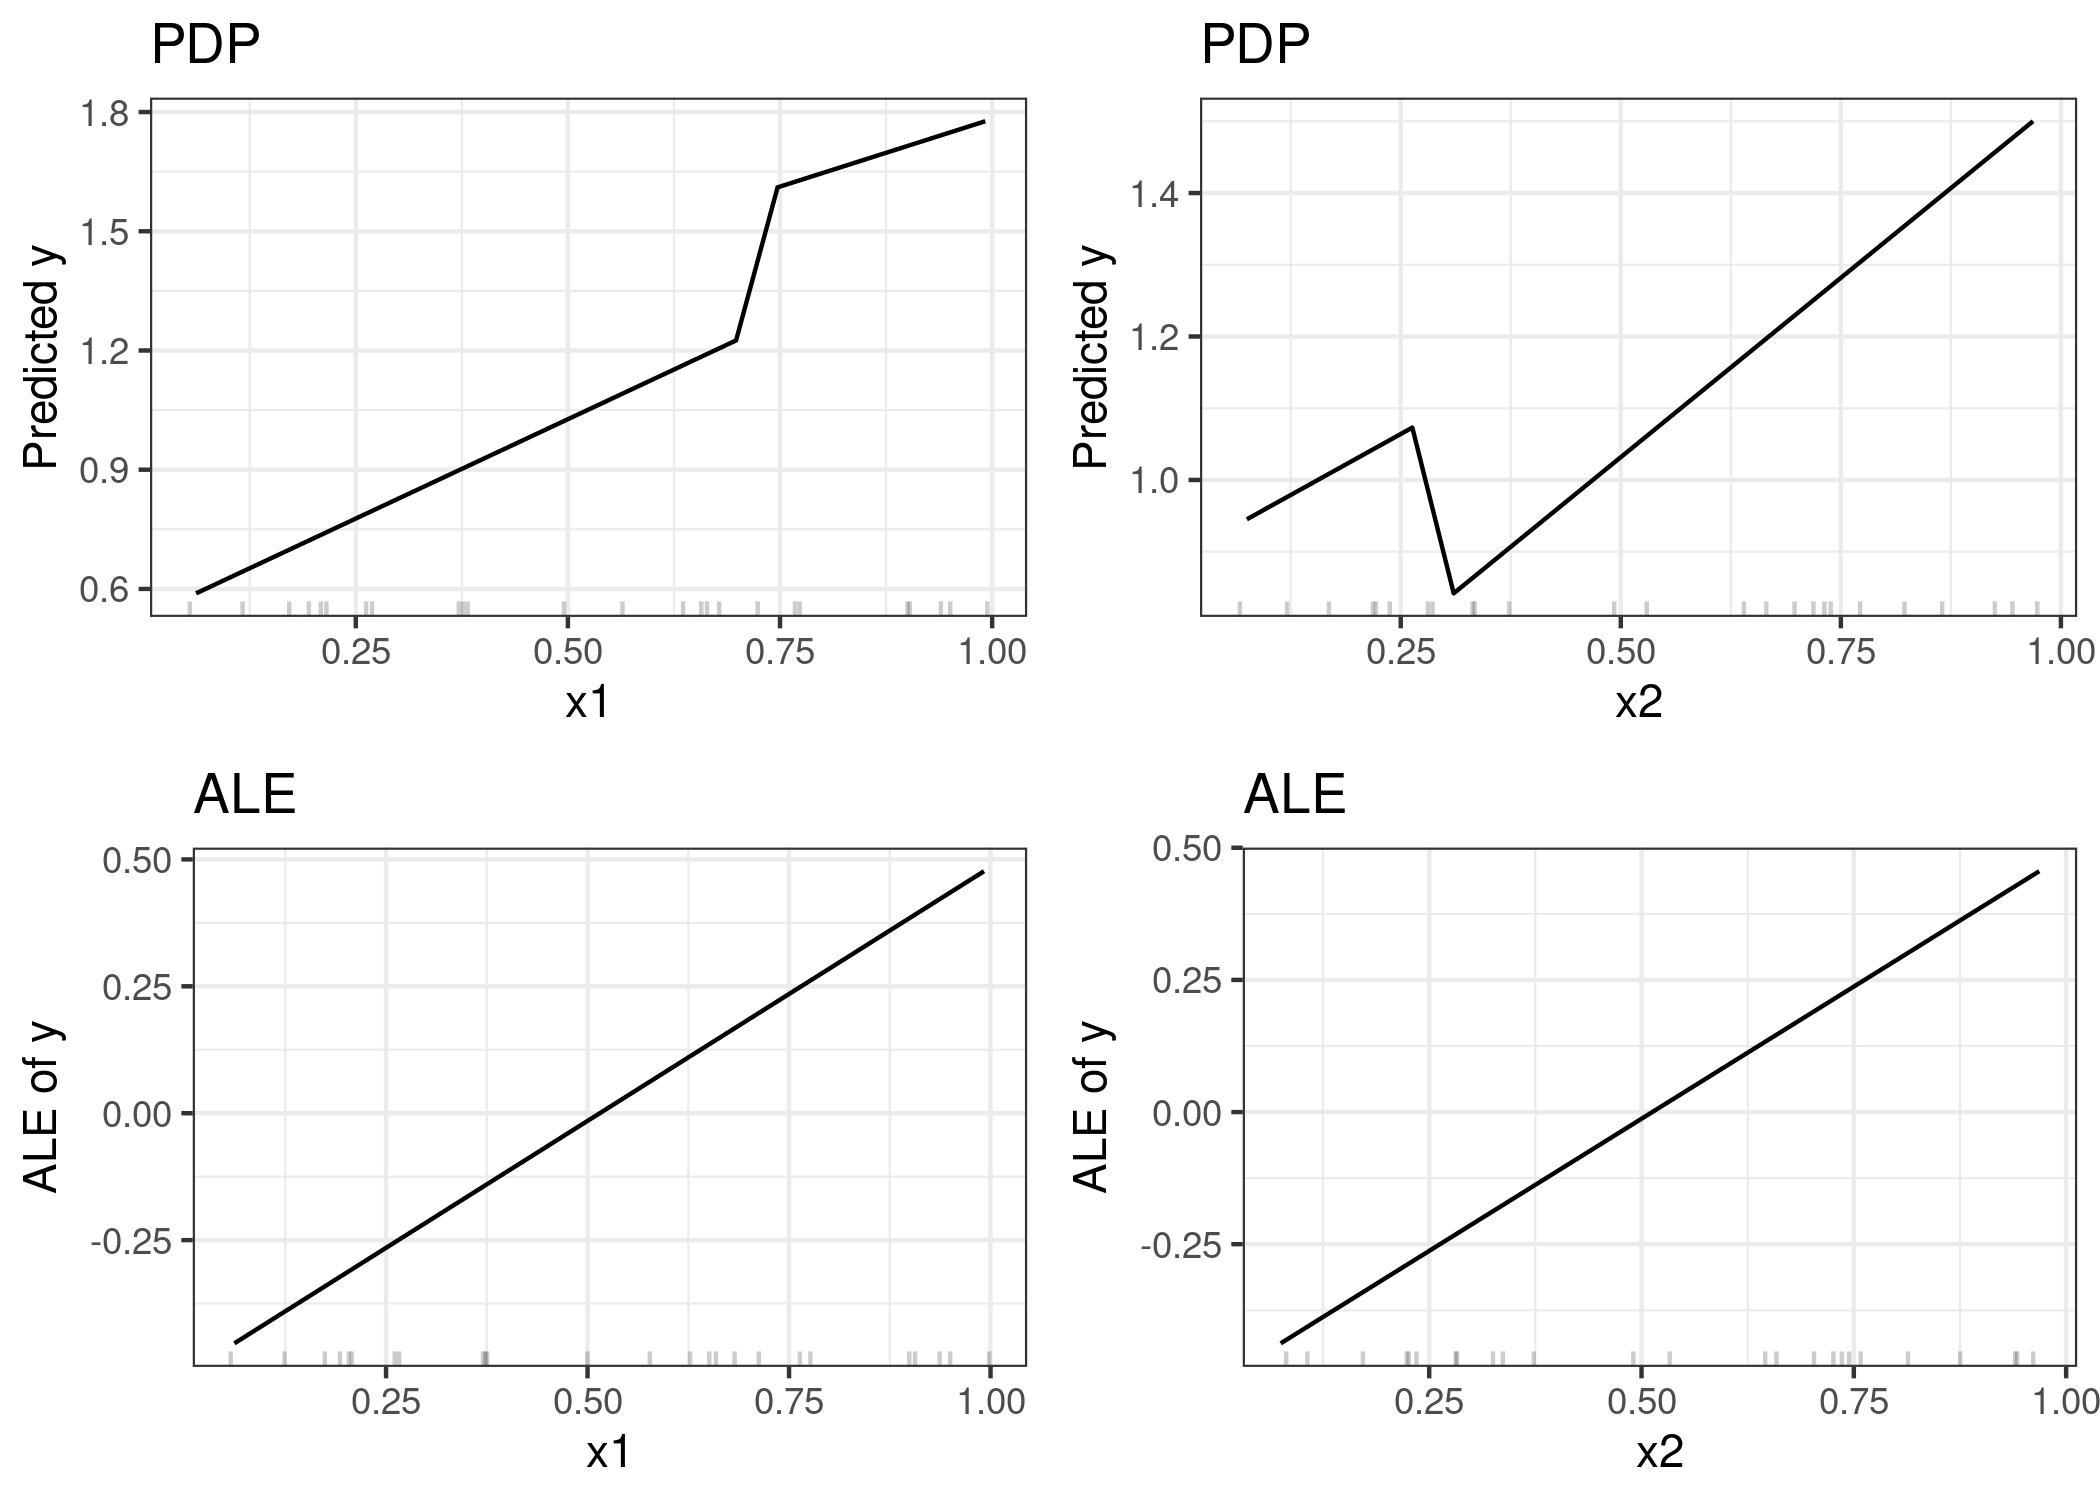 Comparison of the feature effects computed with PDP (upper row) and ALE (lower row). The PDP estimates are influenced by the odd behavior of the model outside the data distribution (steep jumps in the plots). The ALE plots correctly identify that the machine learning model has a linear relationship between features and prediction, ignoring areas without data.